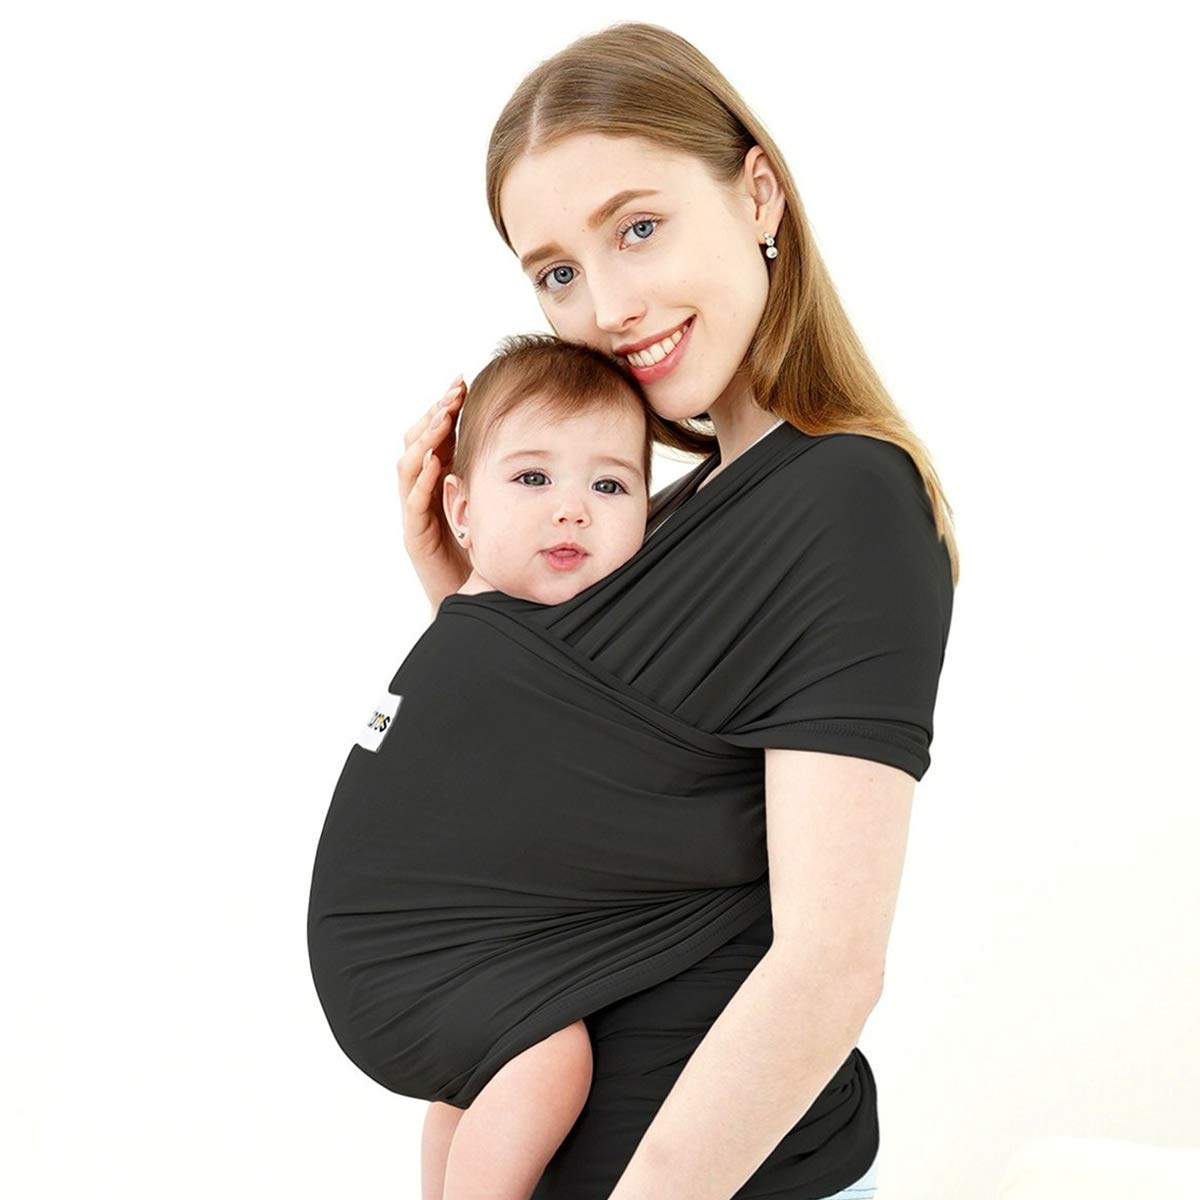 Cotton Kid Baby Infant Carrier High Quality Soft Baby Sling Breathable Wrap 